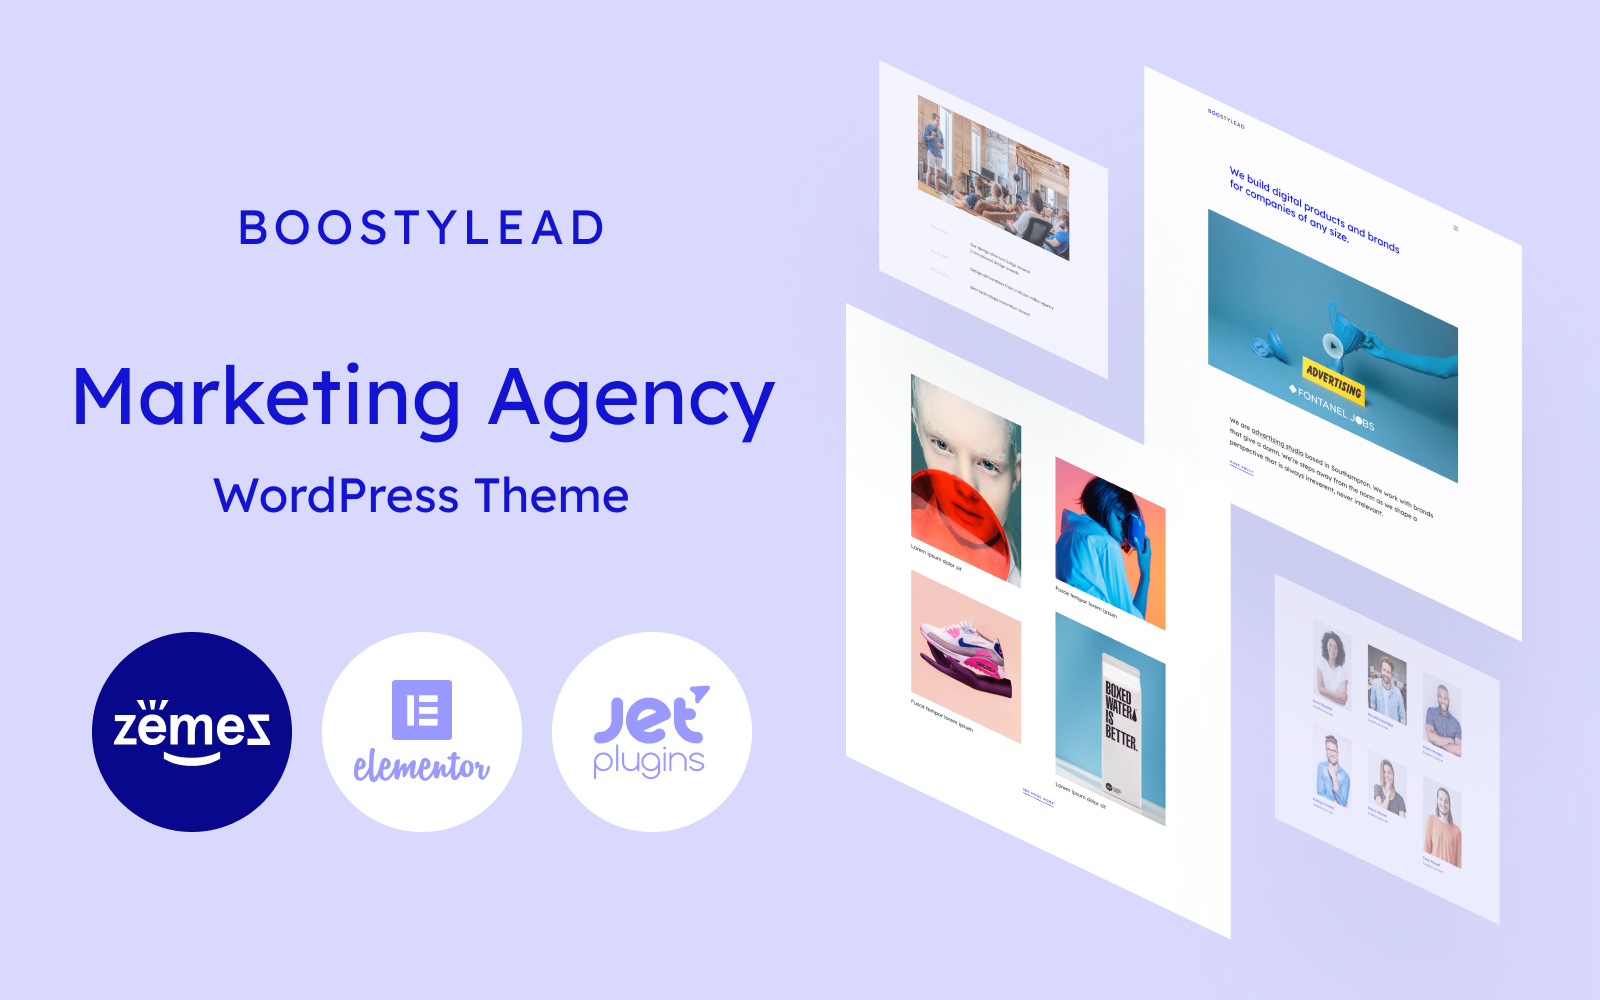 Boostylead - Marketing Agency Website Template with a Neat Design and WordPress Elementor Theme WordPress Theme